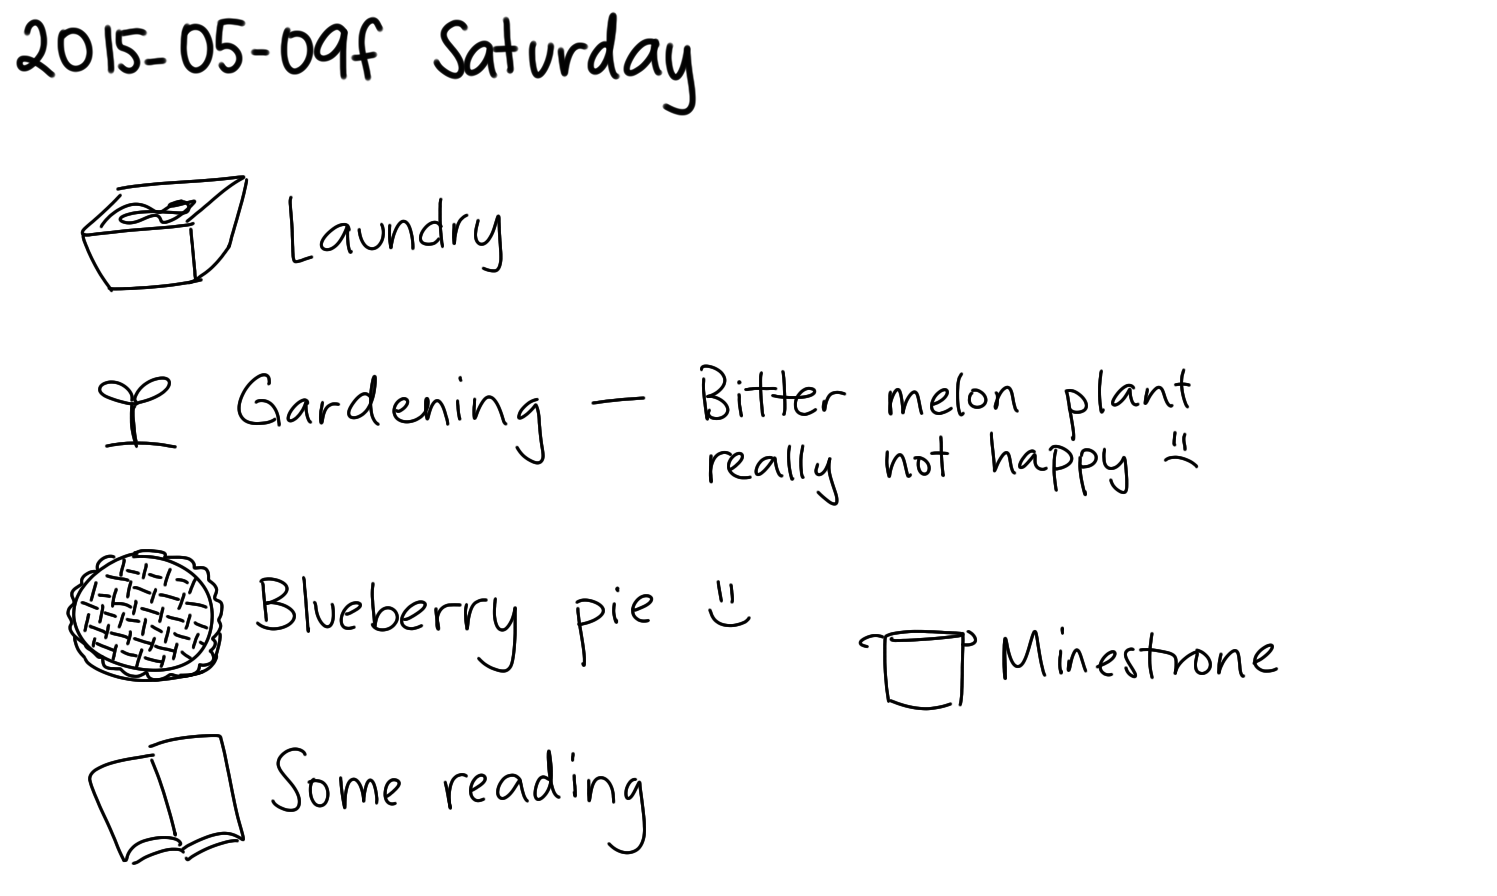 2015-05-09f Saturday -- index card #journal.png